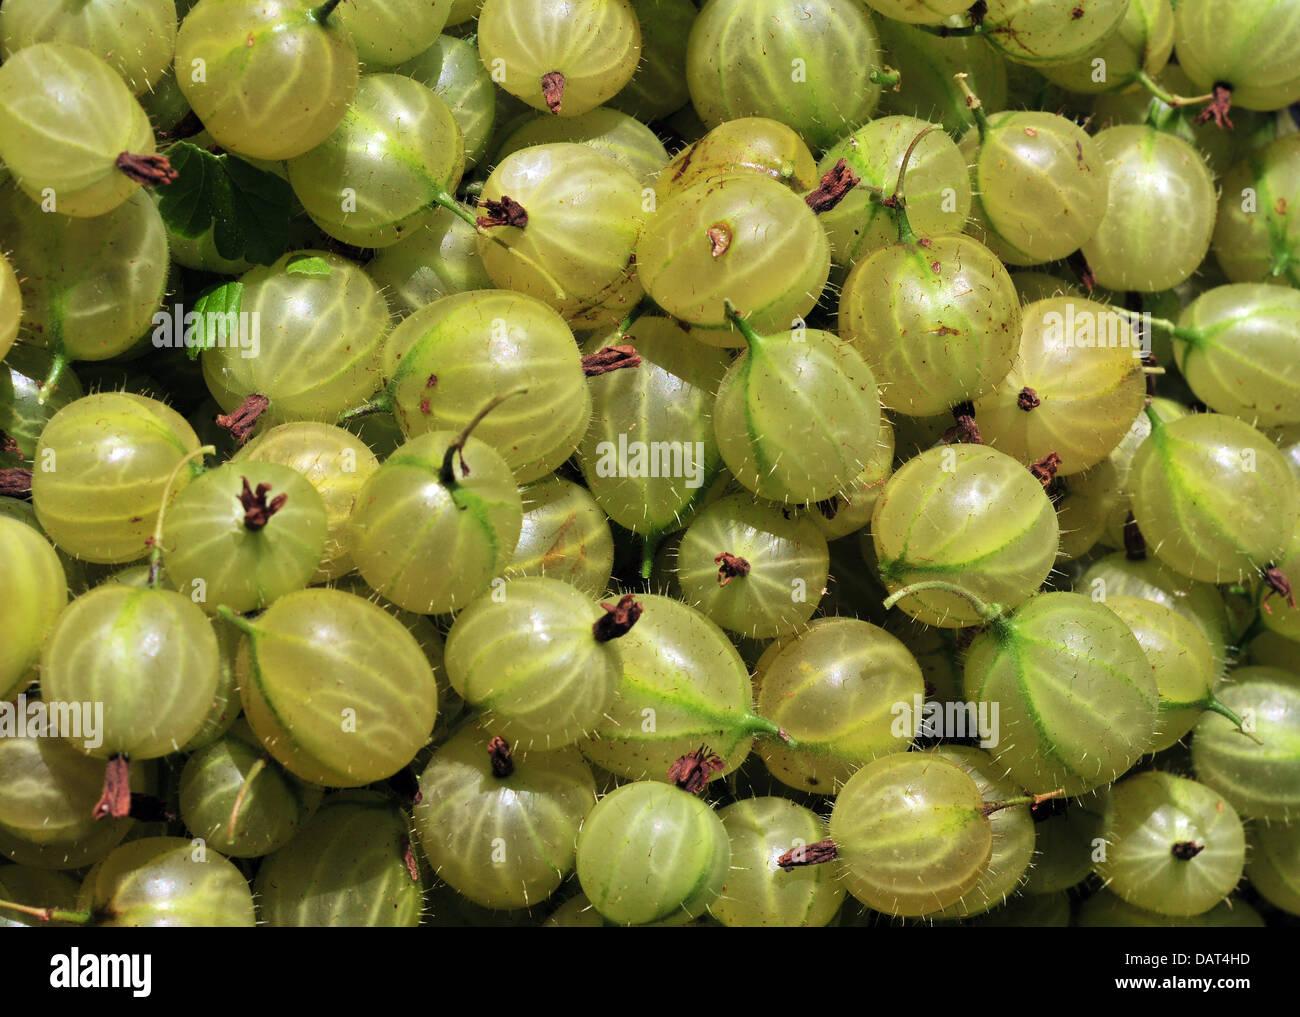 Aberystwyth, Wales, UK - An array of new crop gooseberries fresh from the garden near Aberystwyth, Wales, UK- 18 July 2013. Photo credit: John Gilbey. Stock Photo